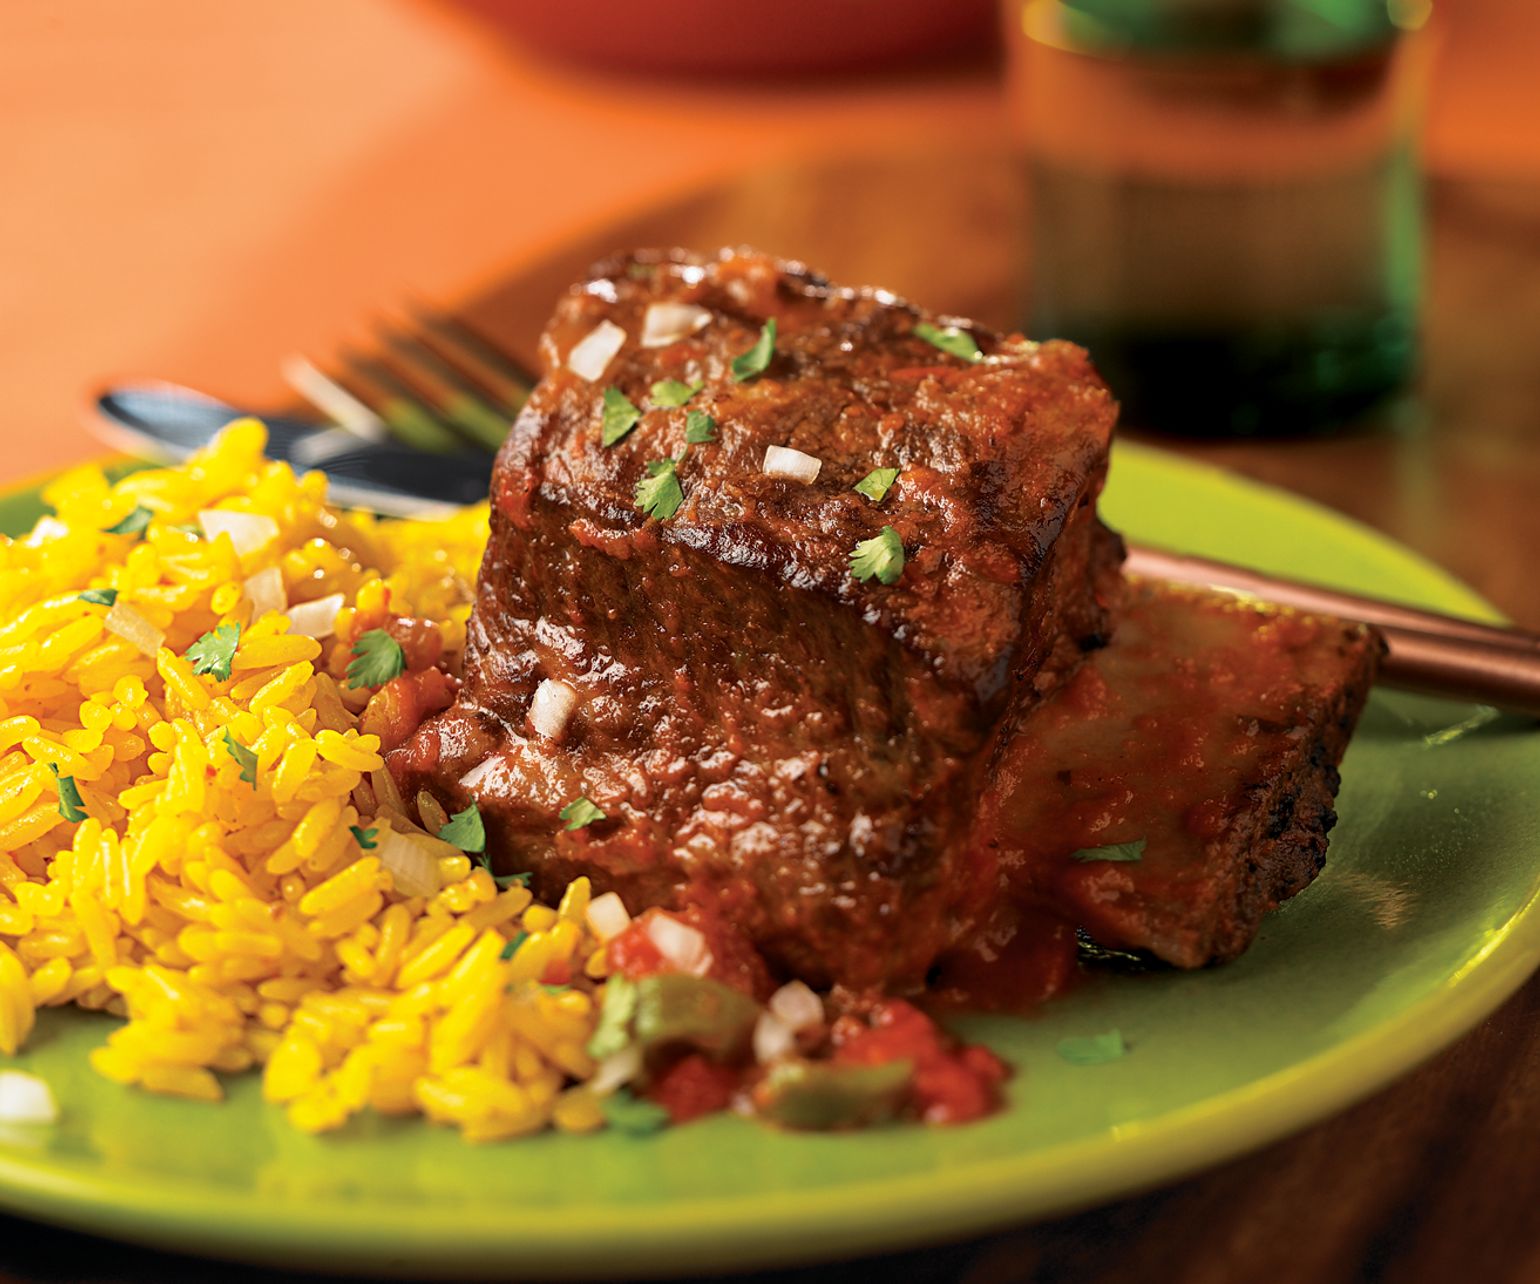 Chipotle-Braised Beef Short Ribs